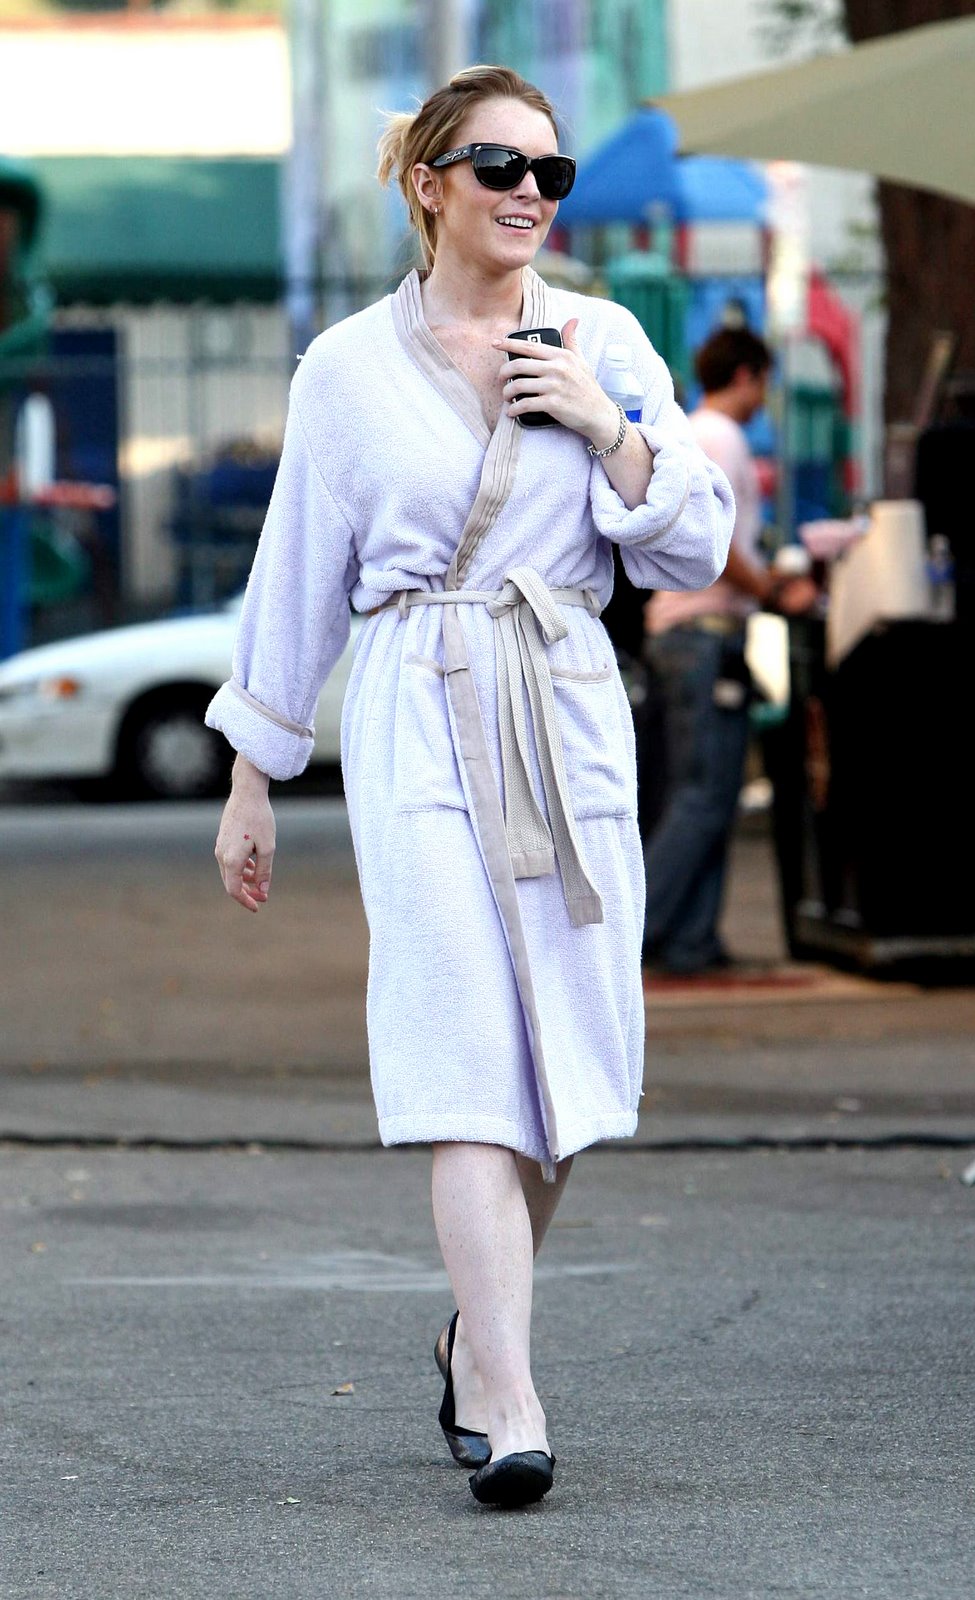 [77361_tlfan_Lindsay_Lohan_performs_her_final_scenes_on_the_set_of_Labor_Pains_7.16.08_23_122_797lo.jpg]